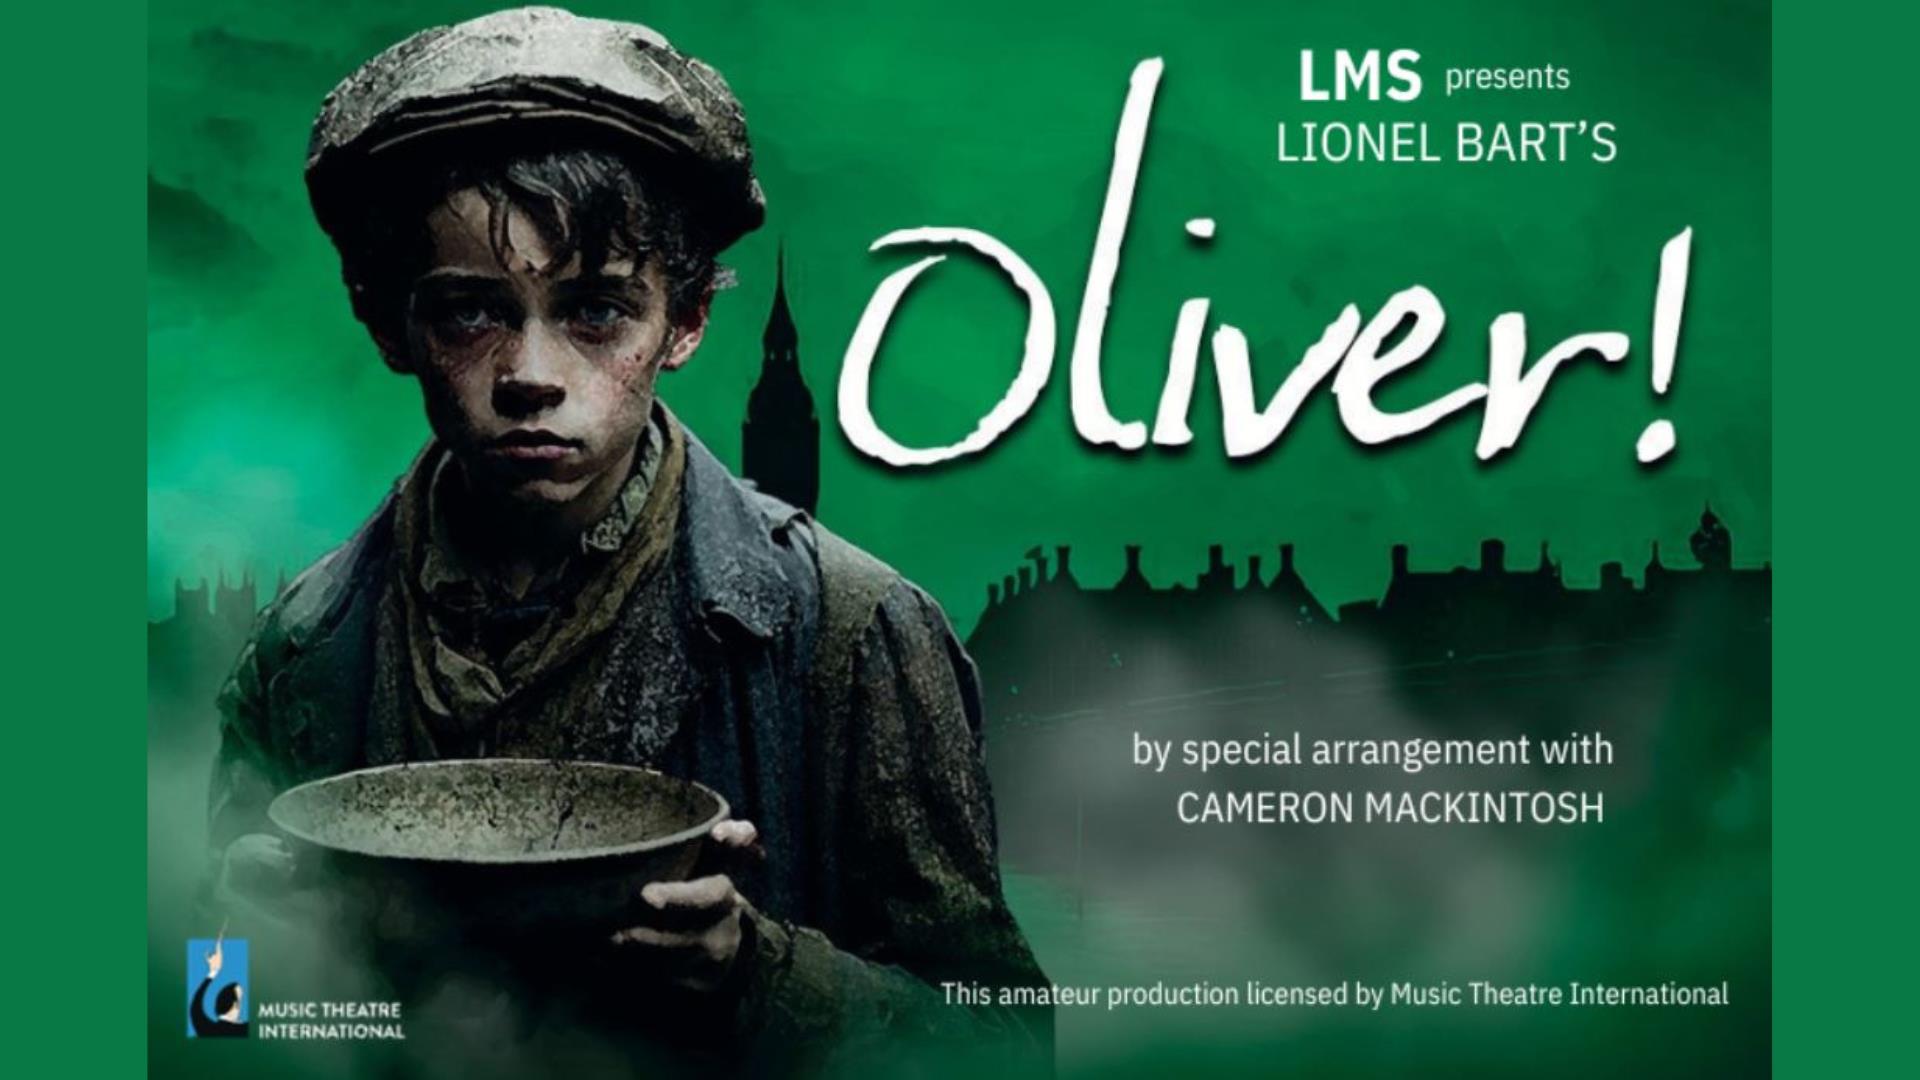 Promotional image for the upcoming 'Oliver' performance at the Millennium Forum Theatre & Conference Centre.